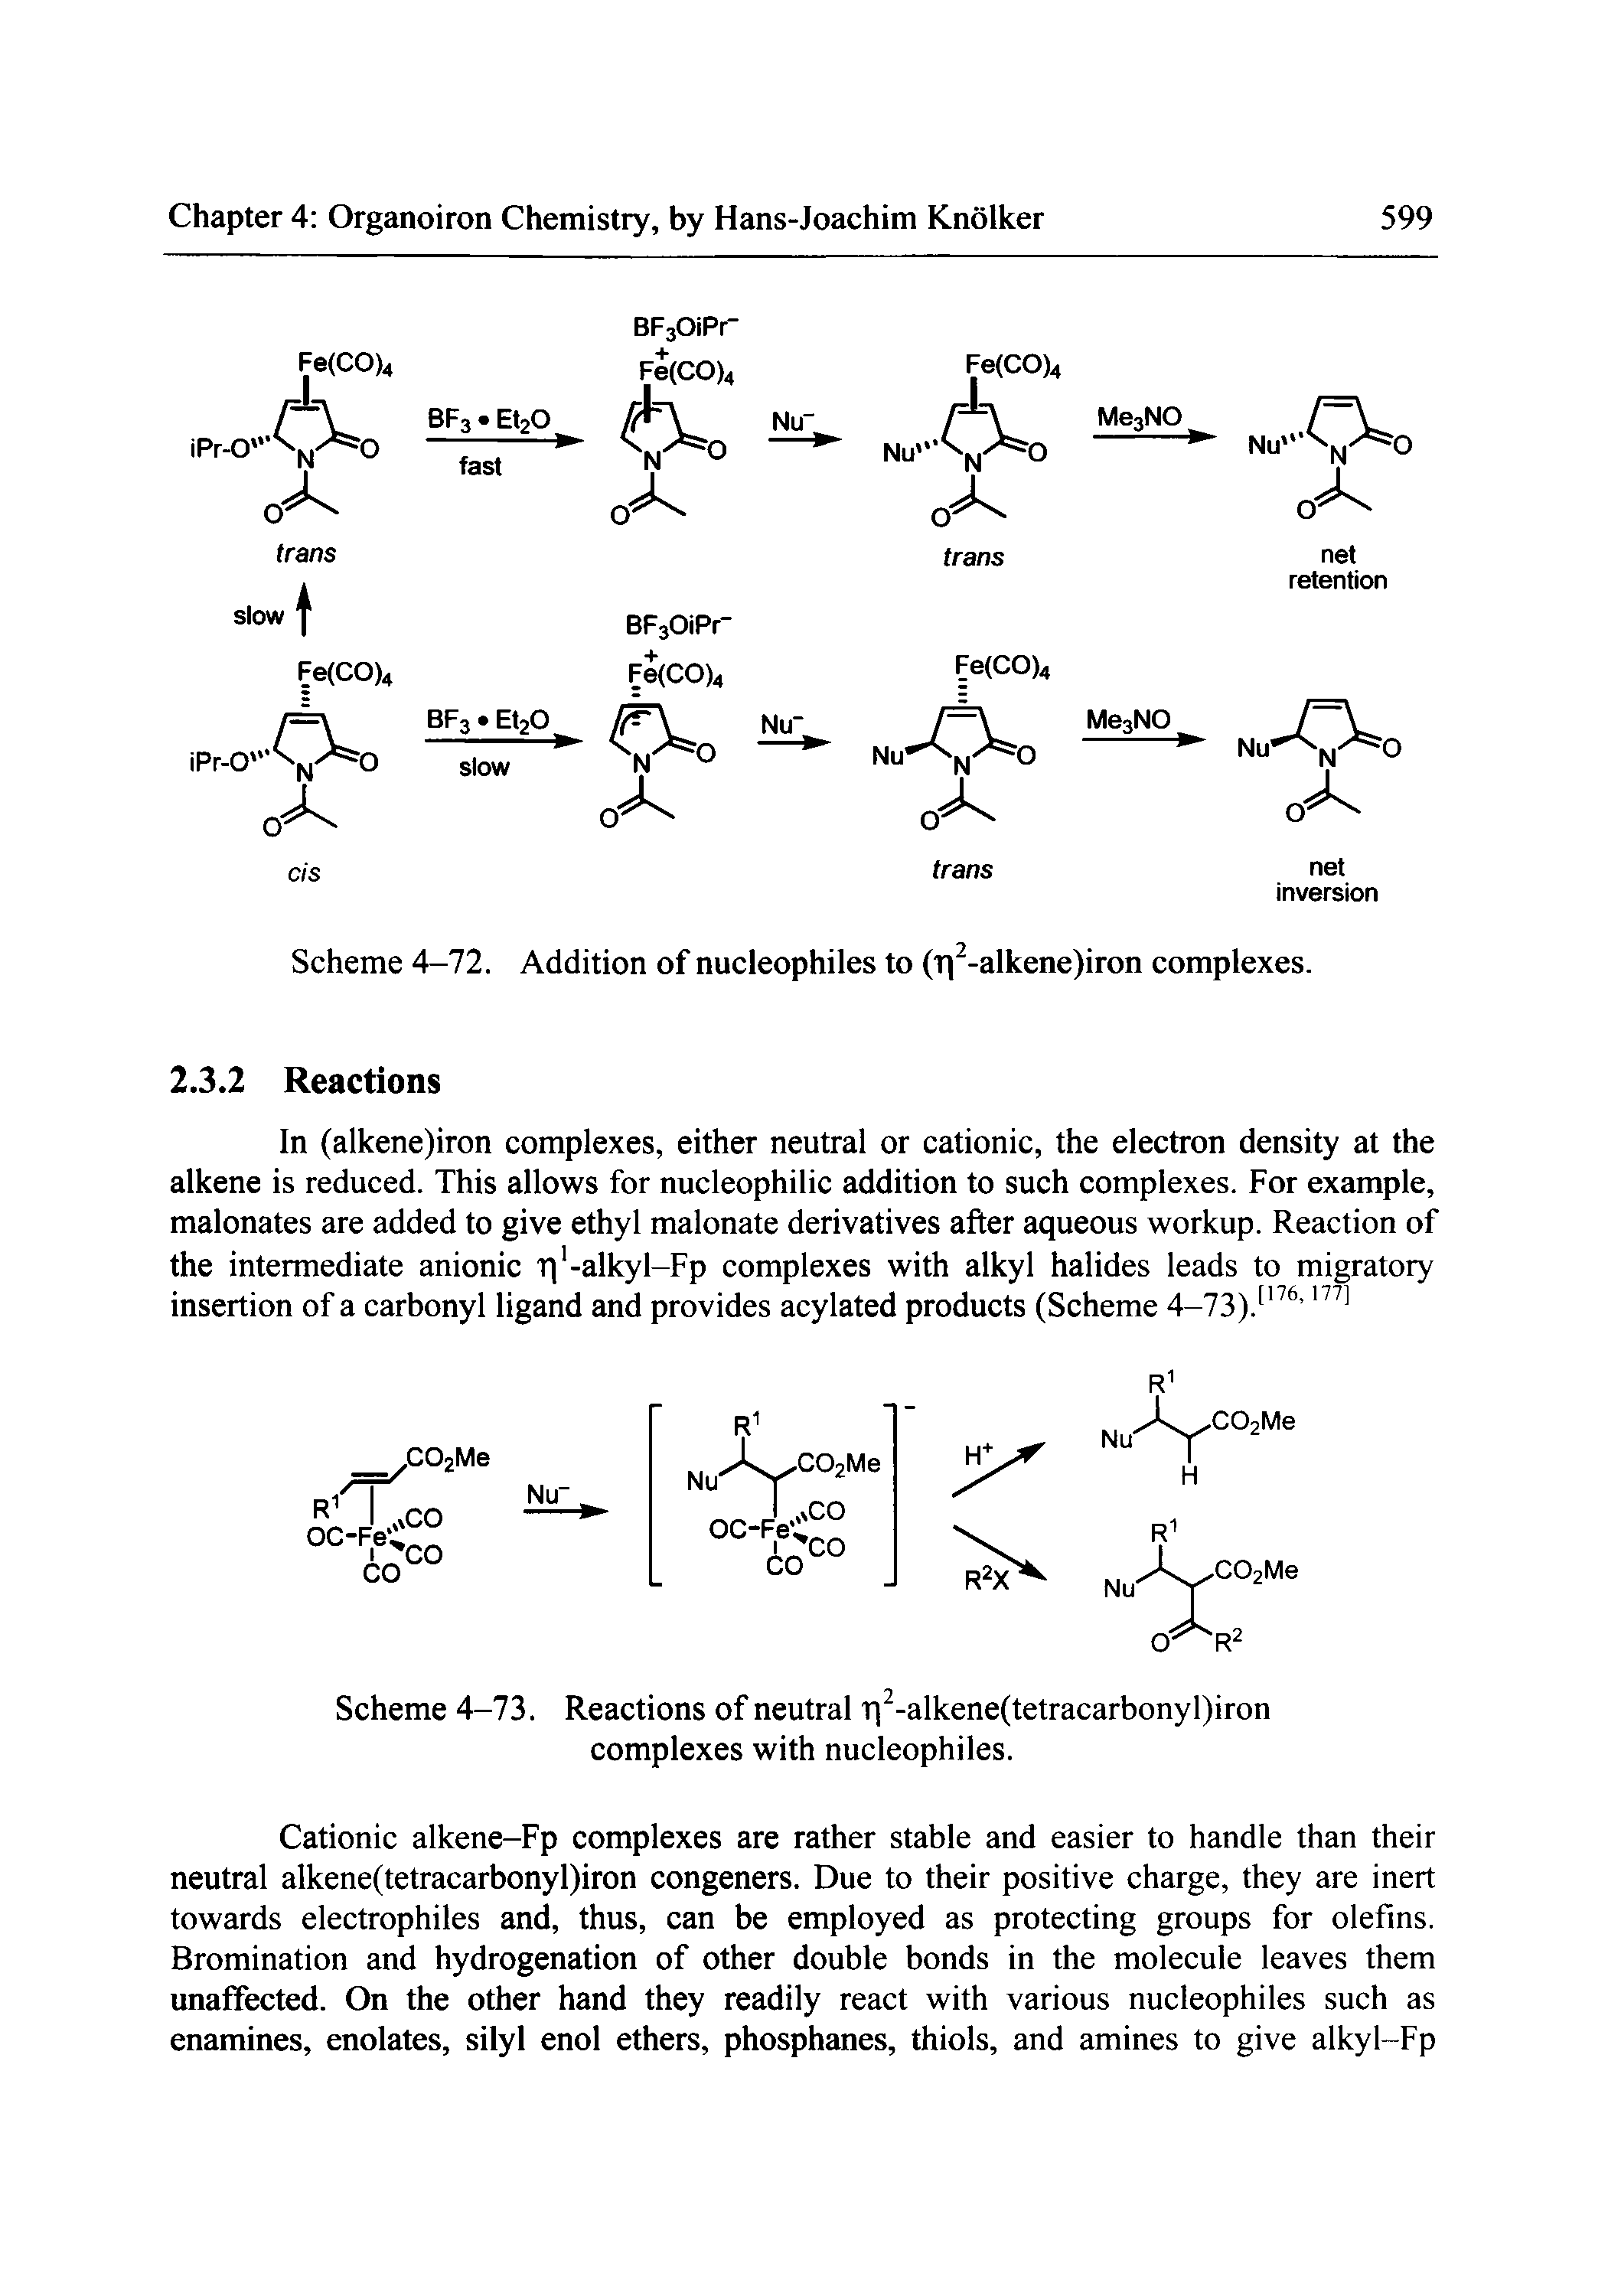 Scheme 4-72. Addition of nucleophiles to (Ti"-alkene)iron complexes.